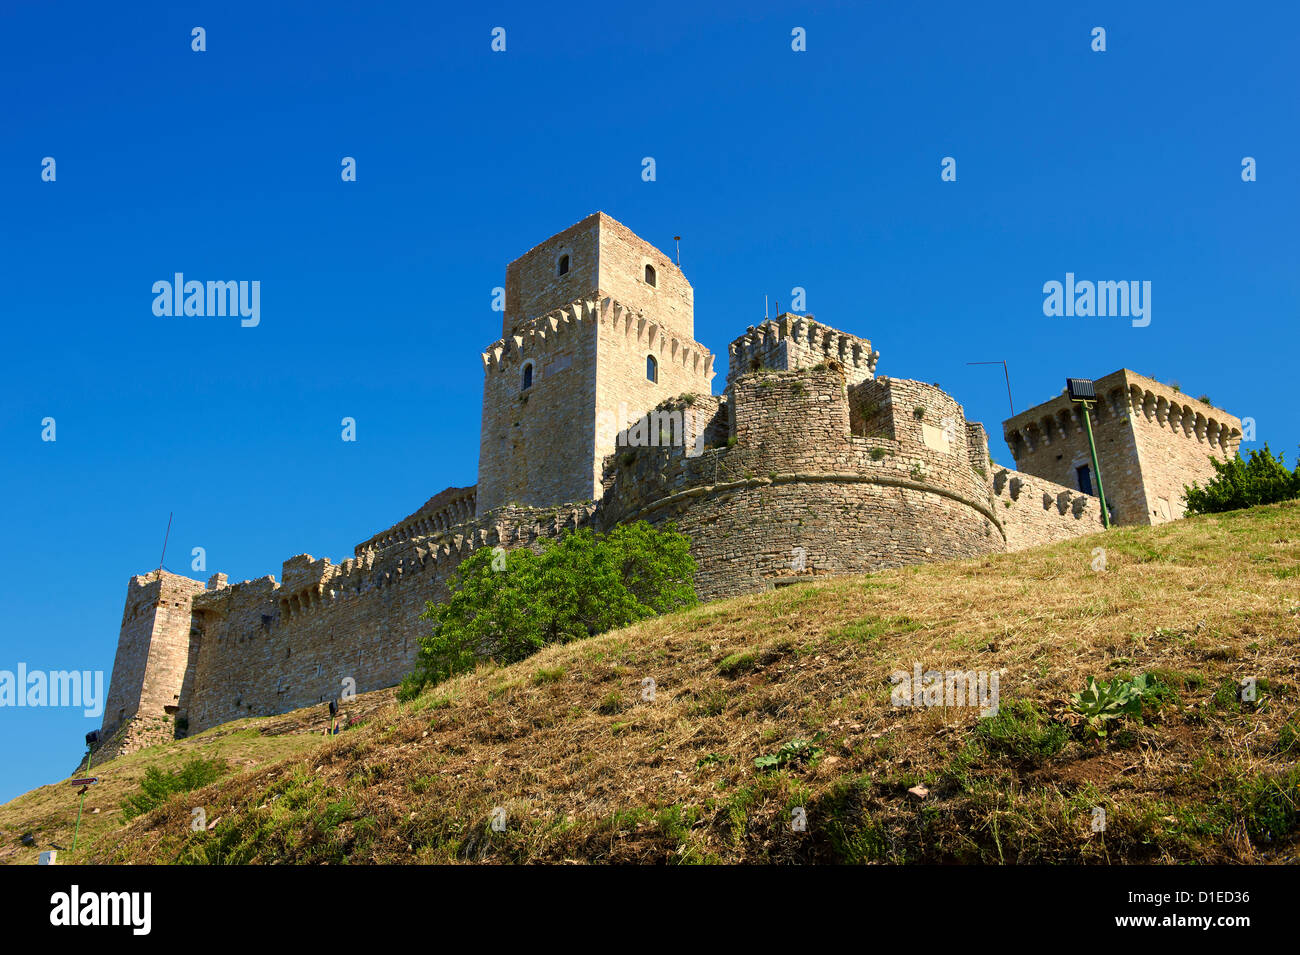 The medieval battlements of the Rocca Maggiore castle on the hilltop above Assisi, Italy Stock Photo